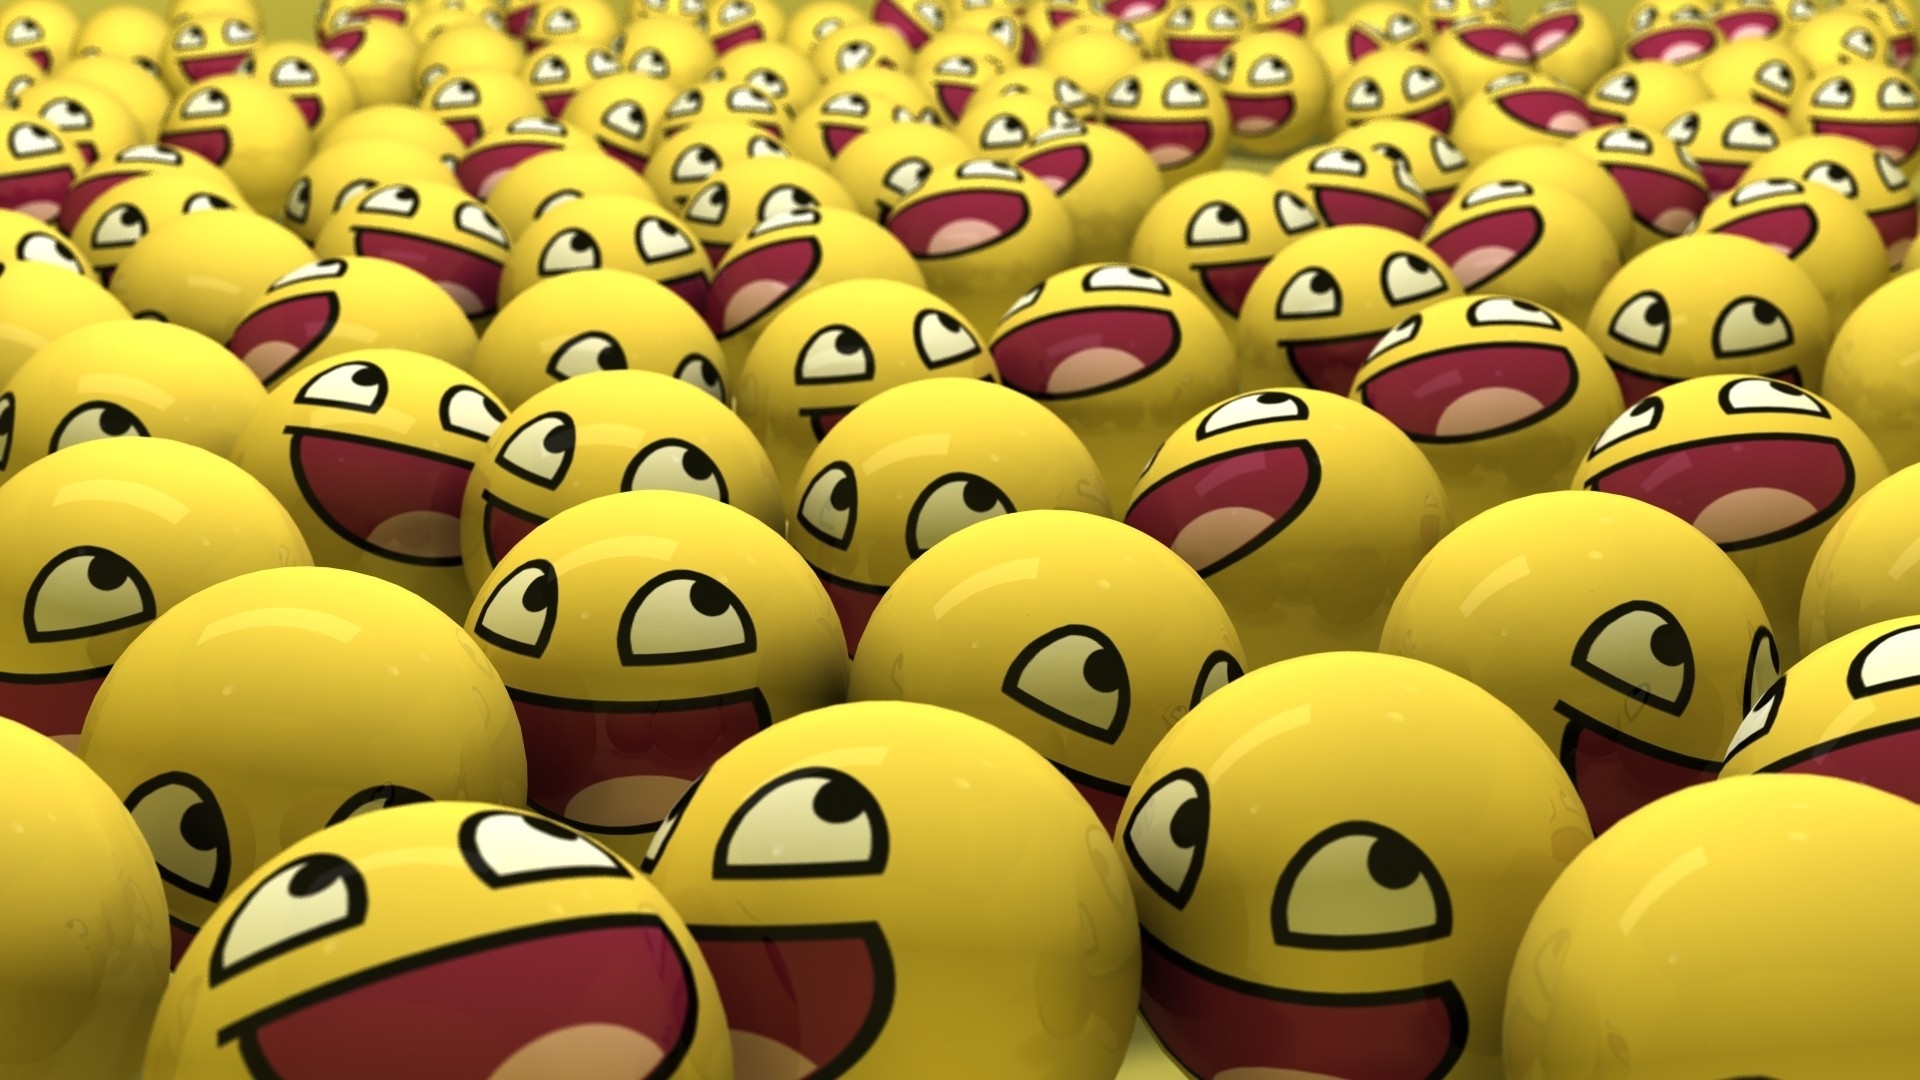 Awesome Face Smiley 1920x1080